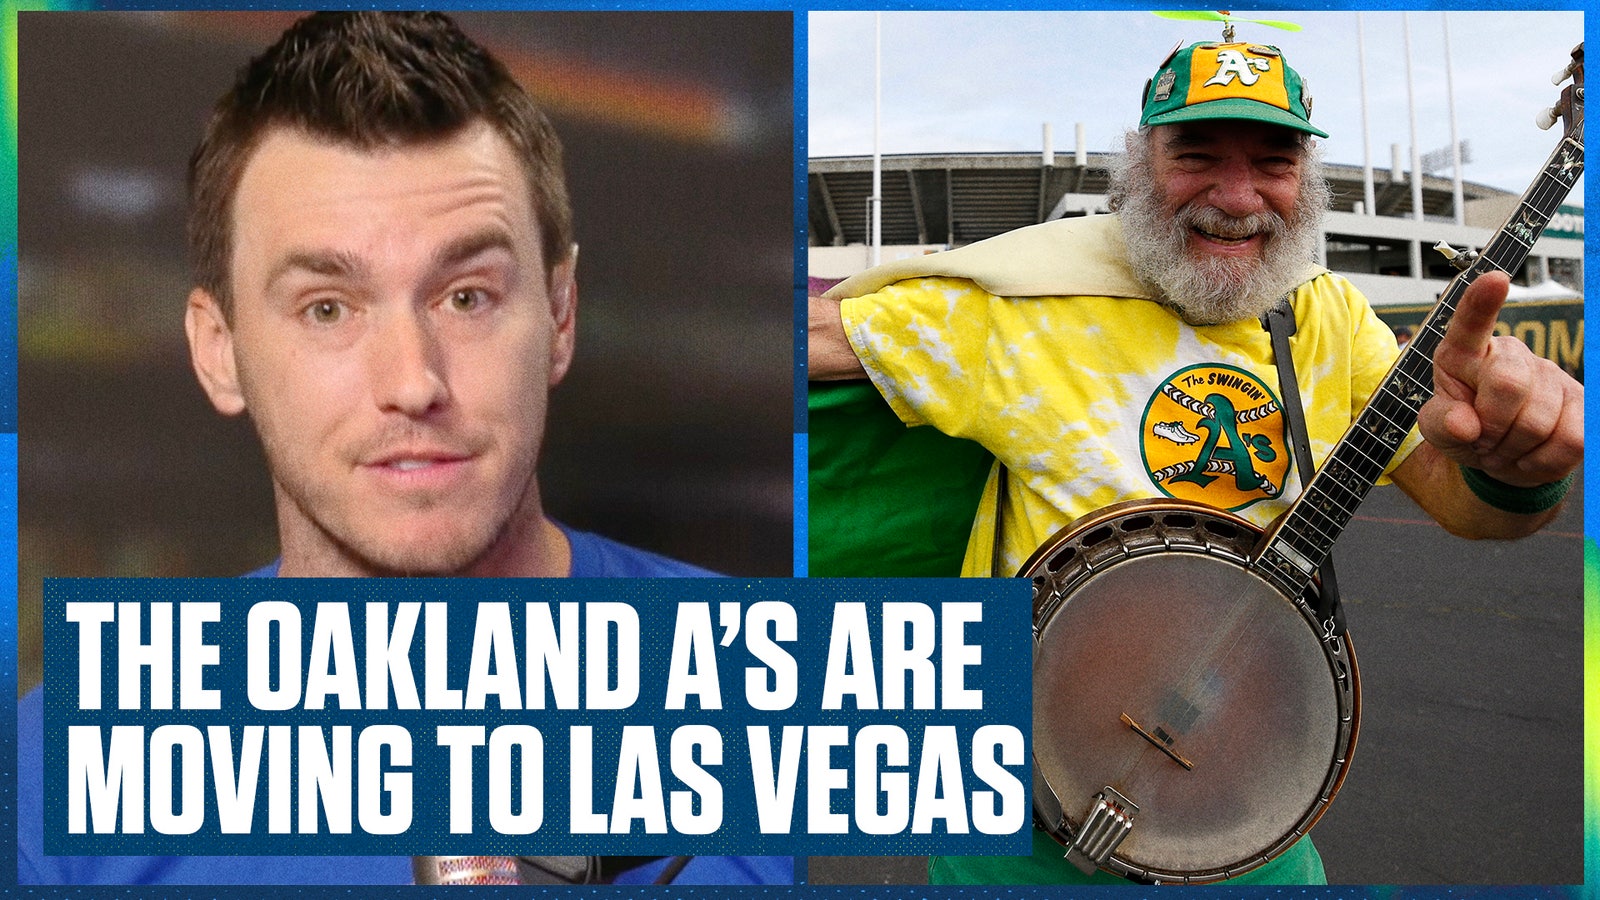 In April, Ben Verlander and Alex Curry discussed the news that A's had purchased land in Las Vegas and planned to build a new stadium for the franchise.  Ben and Alex talk about what this means for fans of MLB and A.